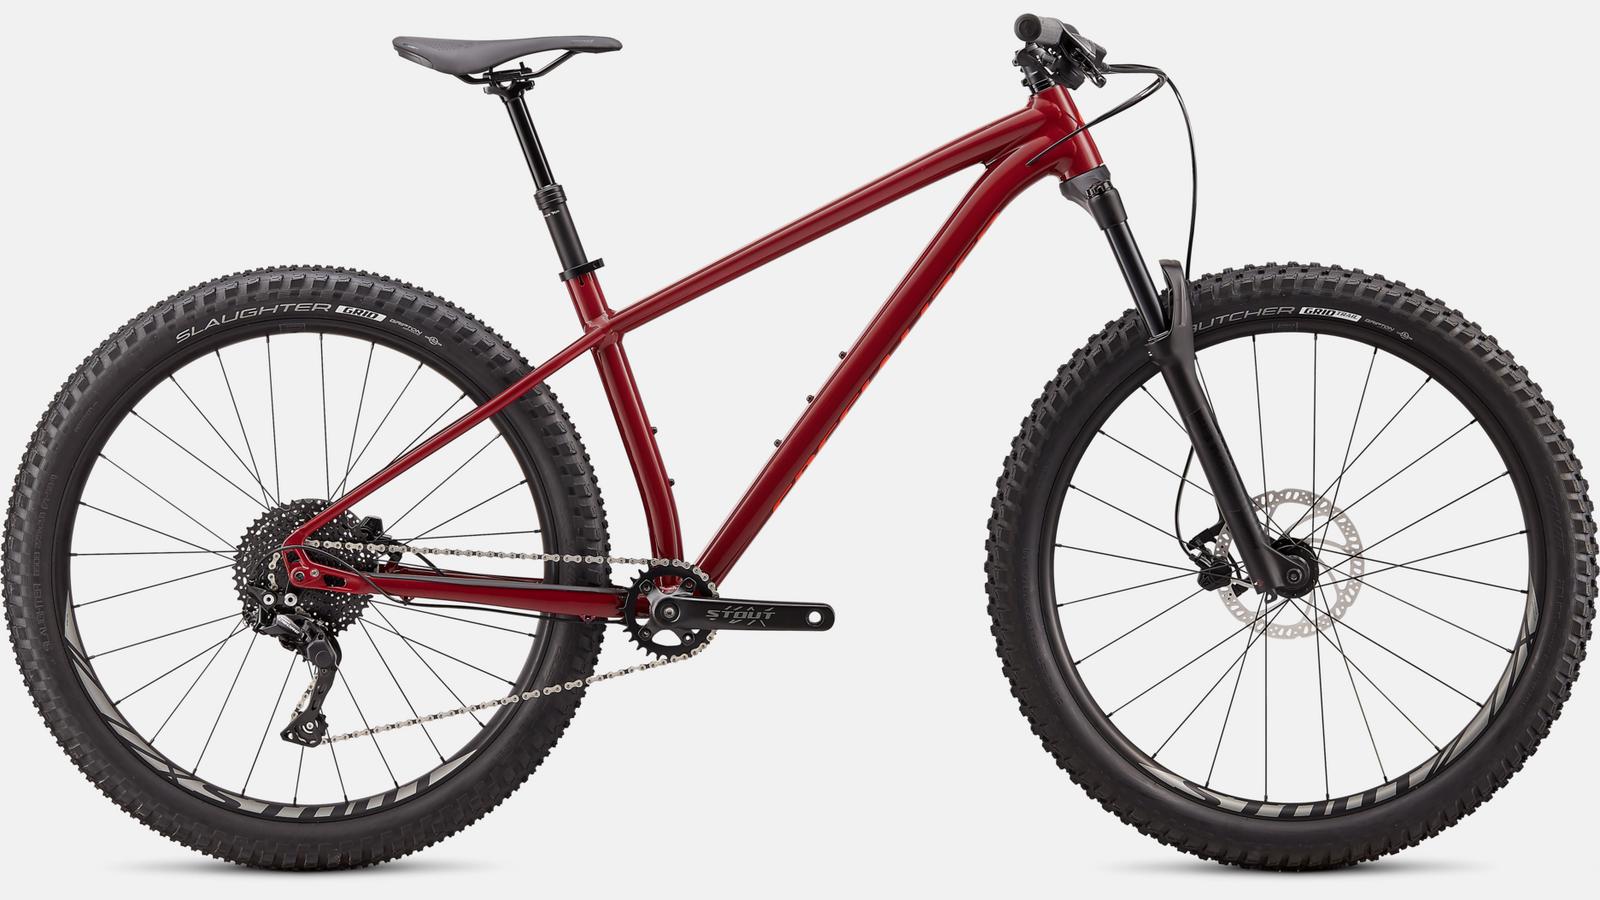 Paint for 2020 Specialized Fuse 27.5 - Gloss Crimson